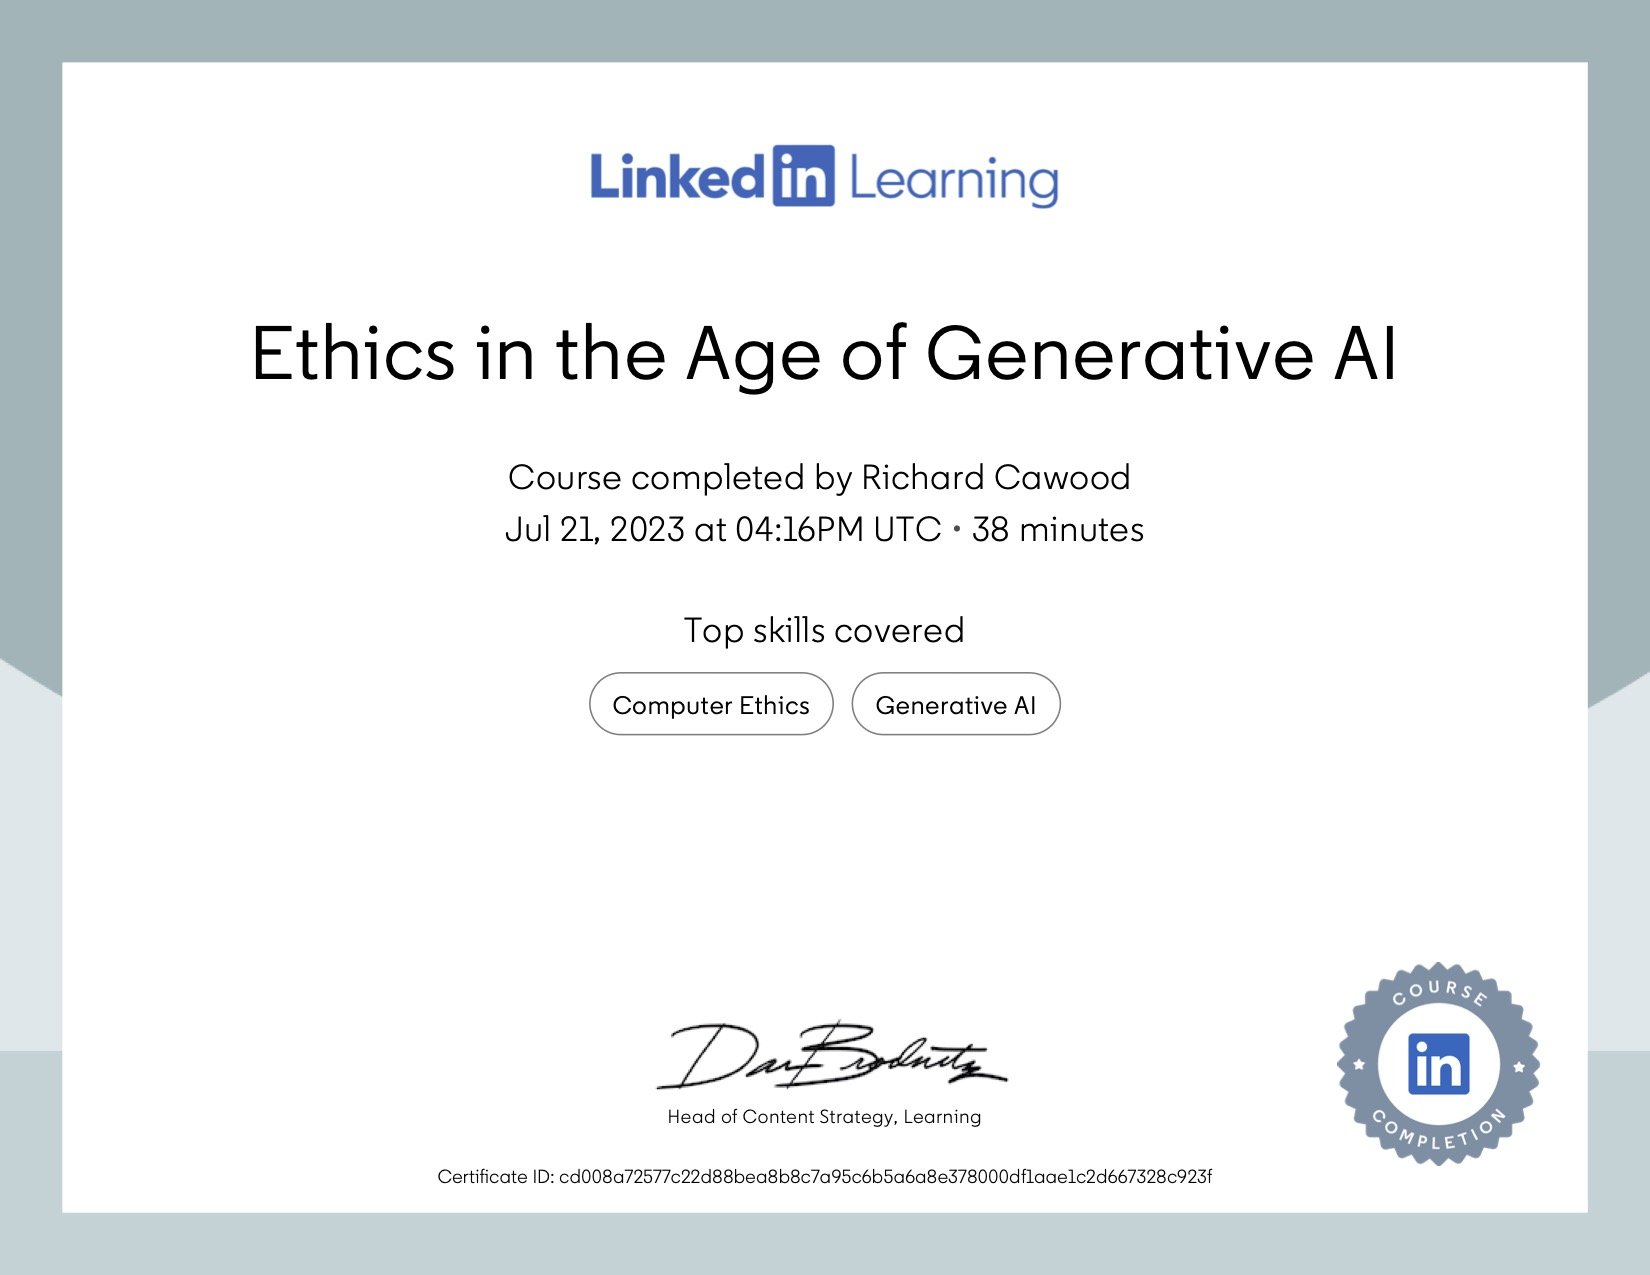 CertificateOfCompletion_Ethics in the Age of Generative AI.jpg